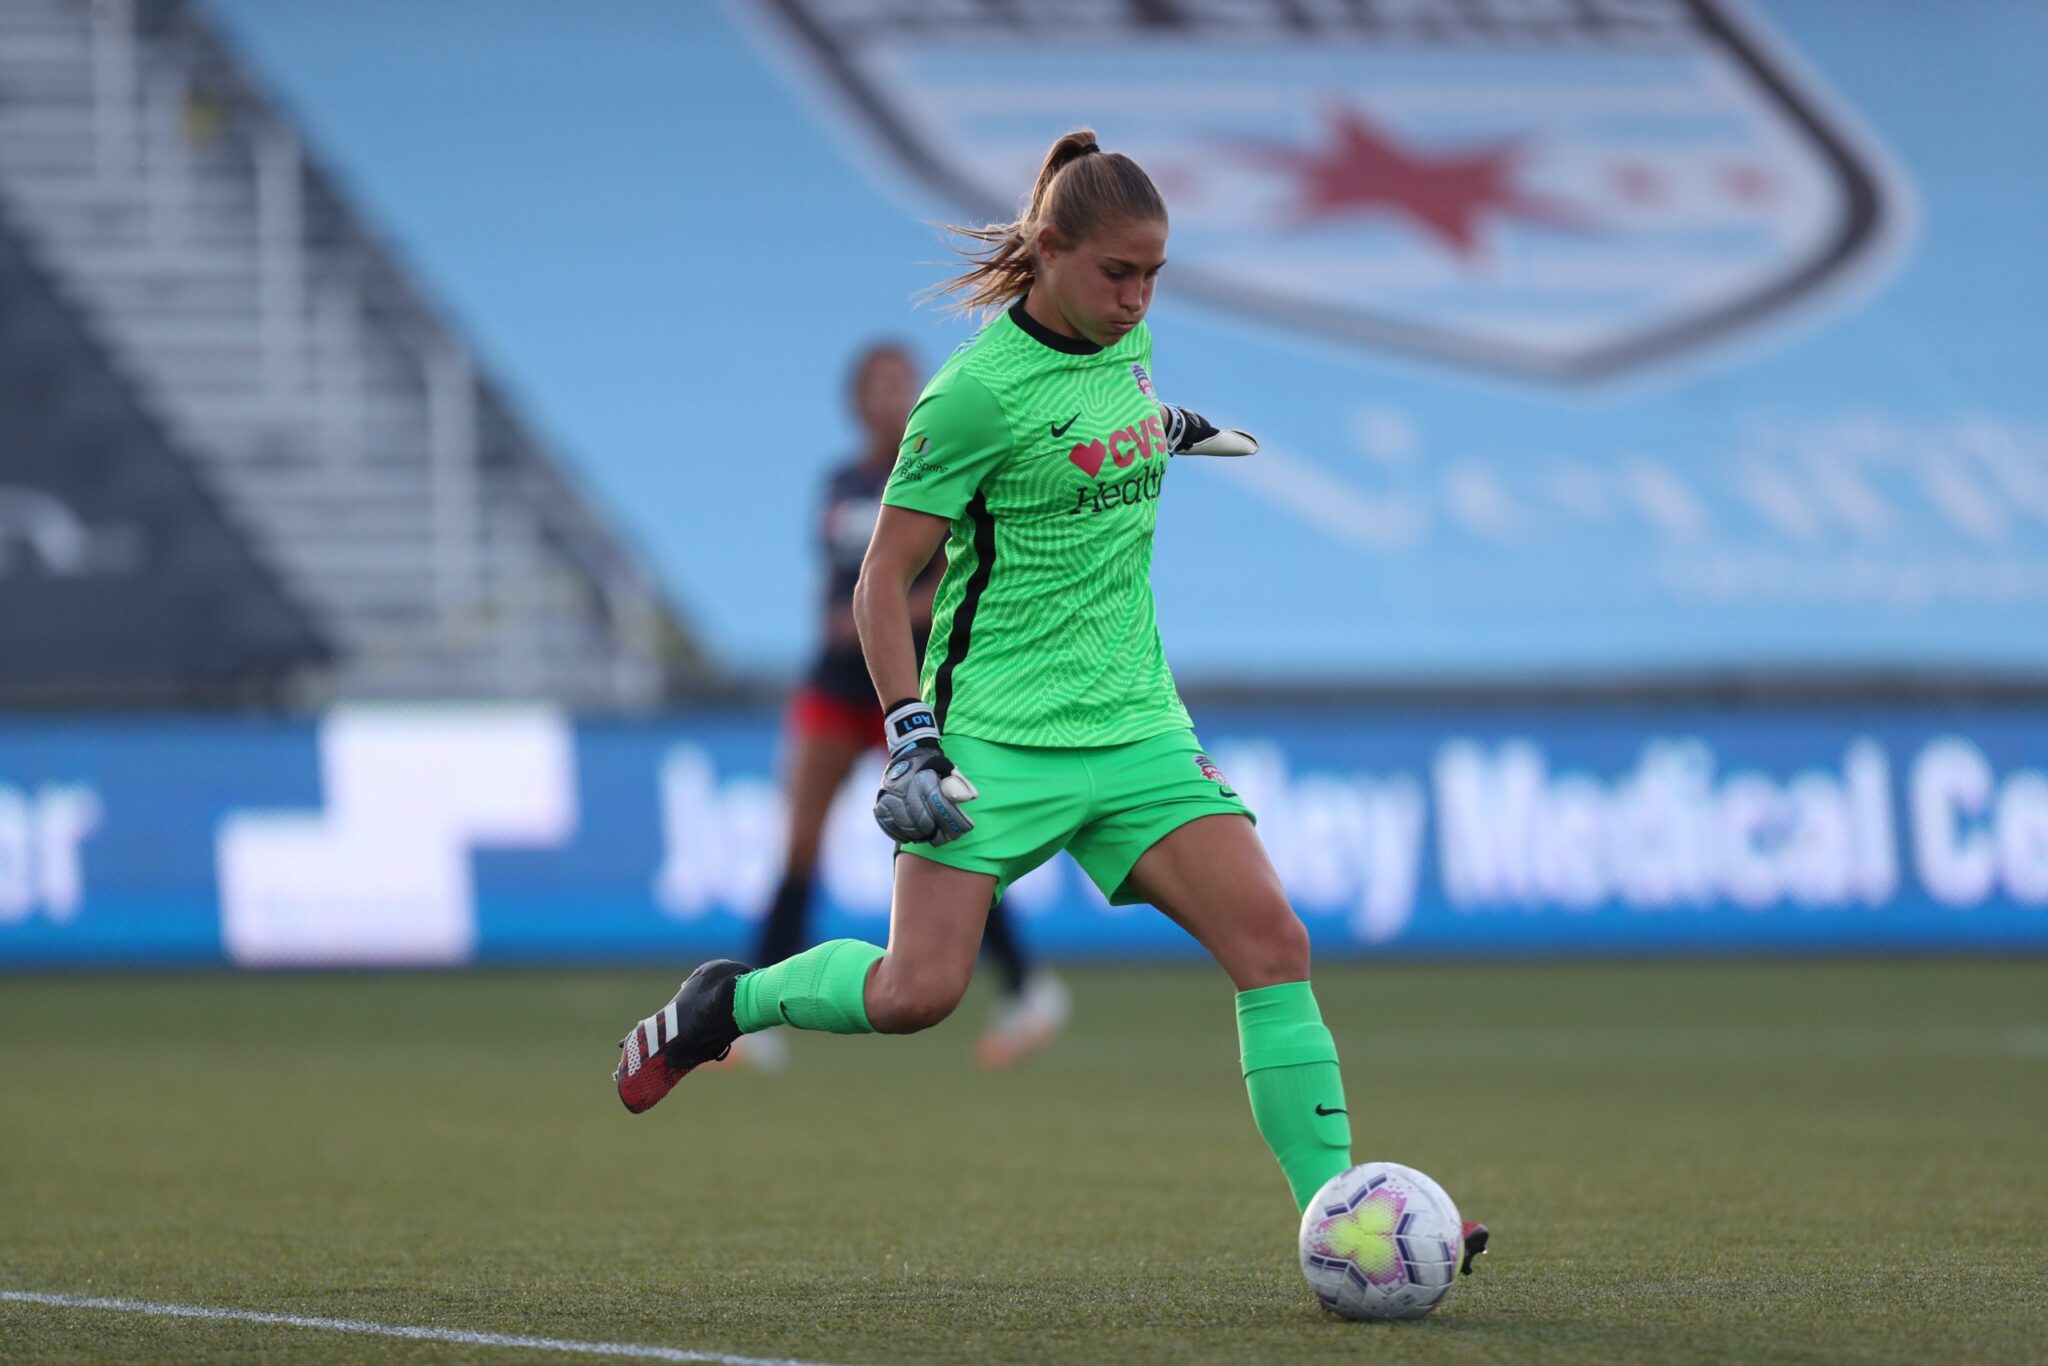 Spirit stumble against Courage in second game of 2020 NWSL Challenge Cup Featured Image